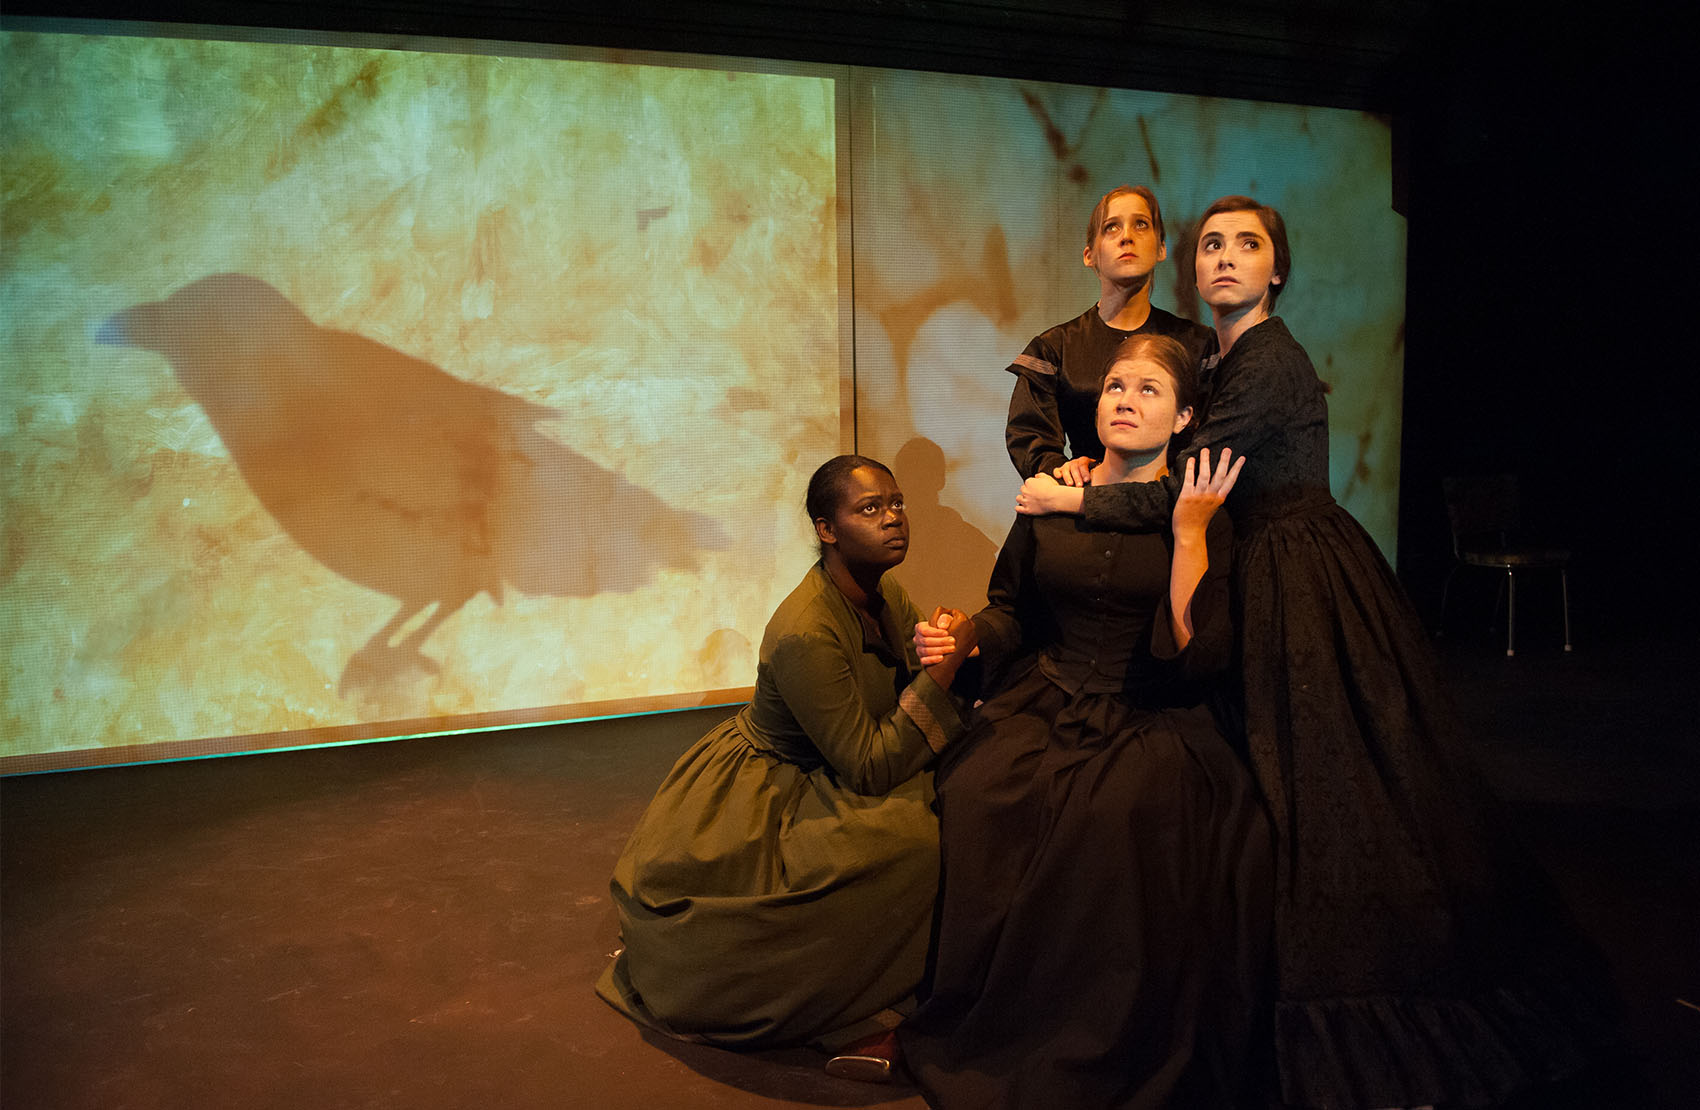 Four young women (one black, 3 white) are huddled near each other. The first woman is in a green vintage dress, crouched next to the 3 other women, who are dressed in all black dresses. They all look up worriedly, a projected raven silhouette on a screen behind them. 